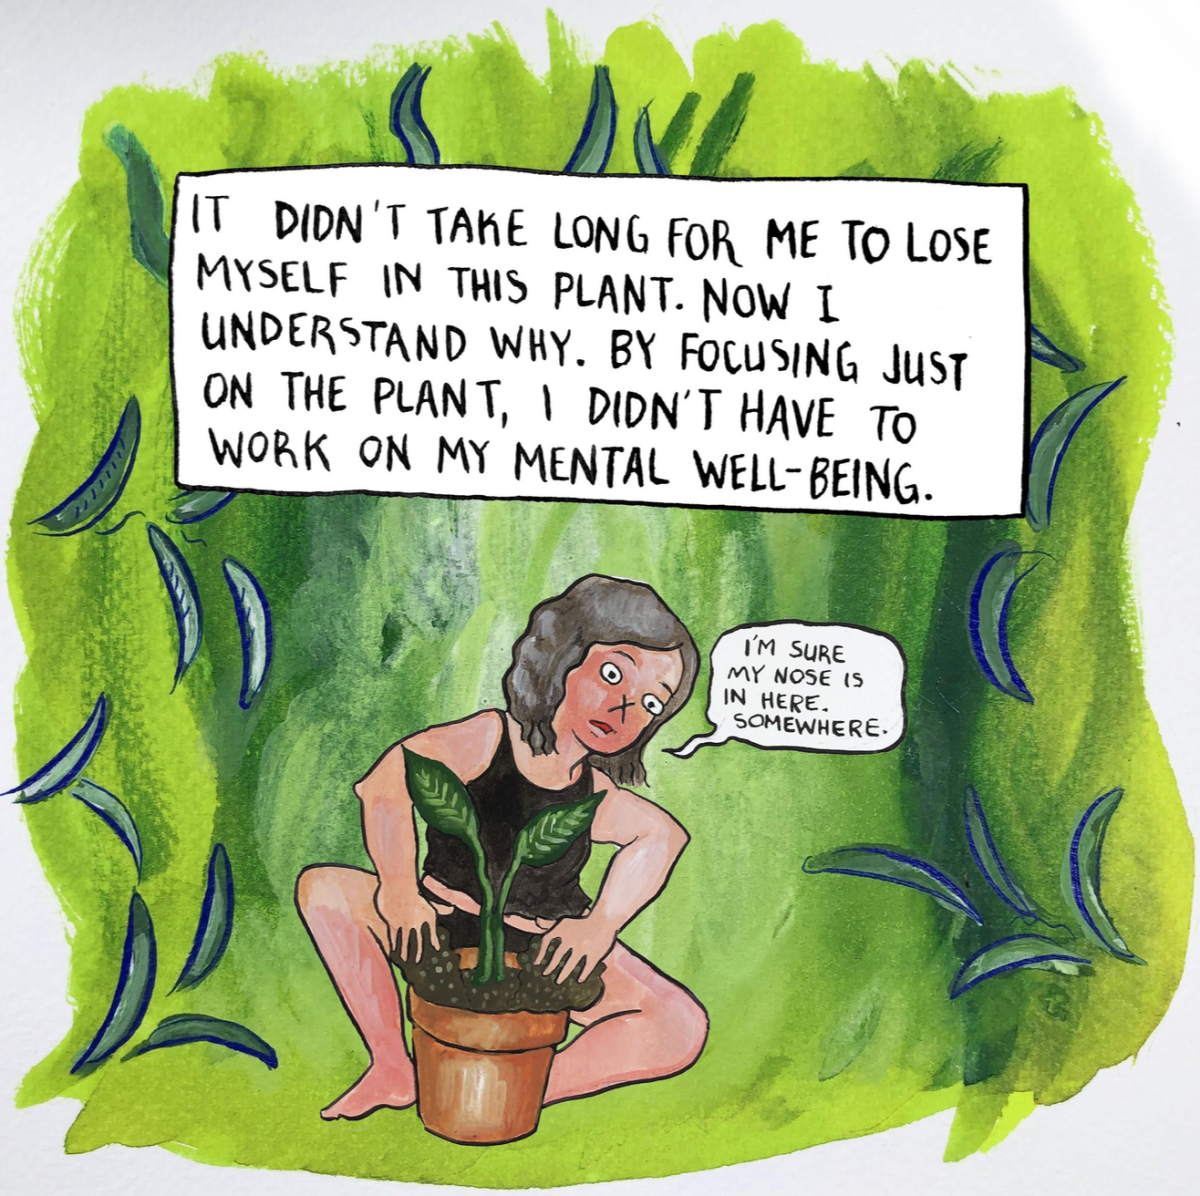 "It didn't take long for me to lose myself in this plant. By focusing on the plant, I didn't have to work on myself"